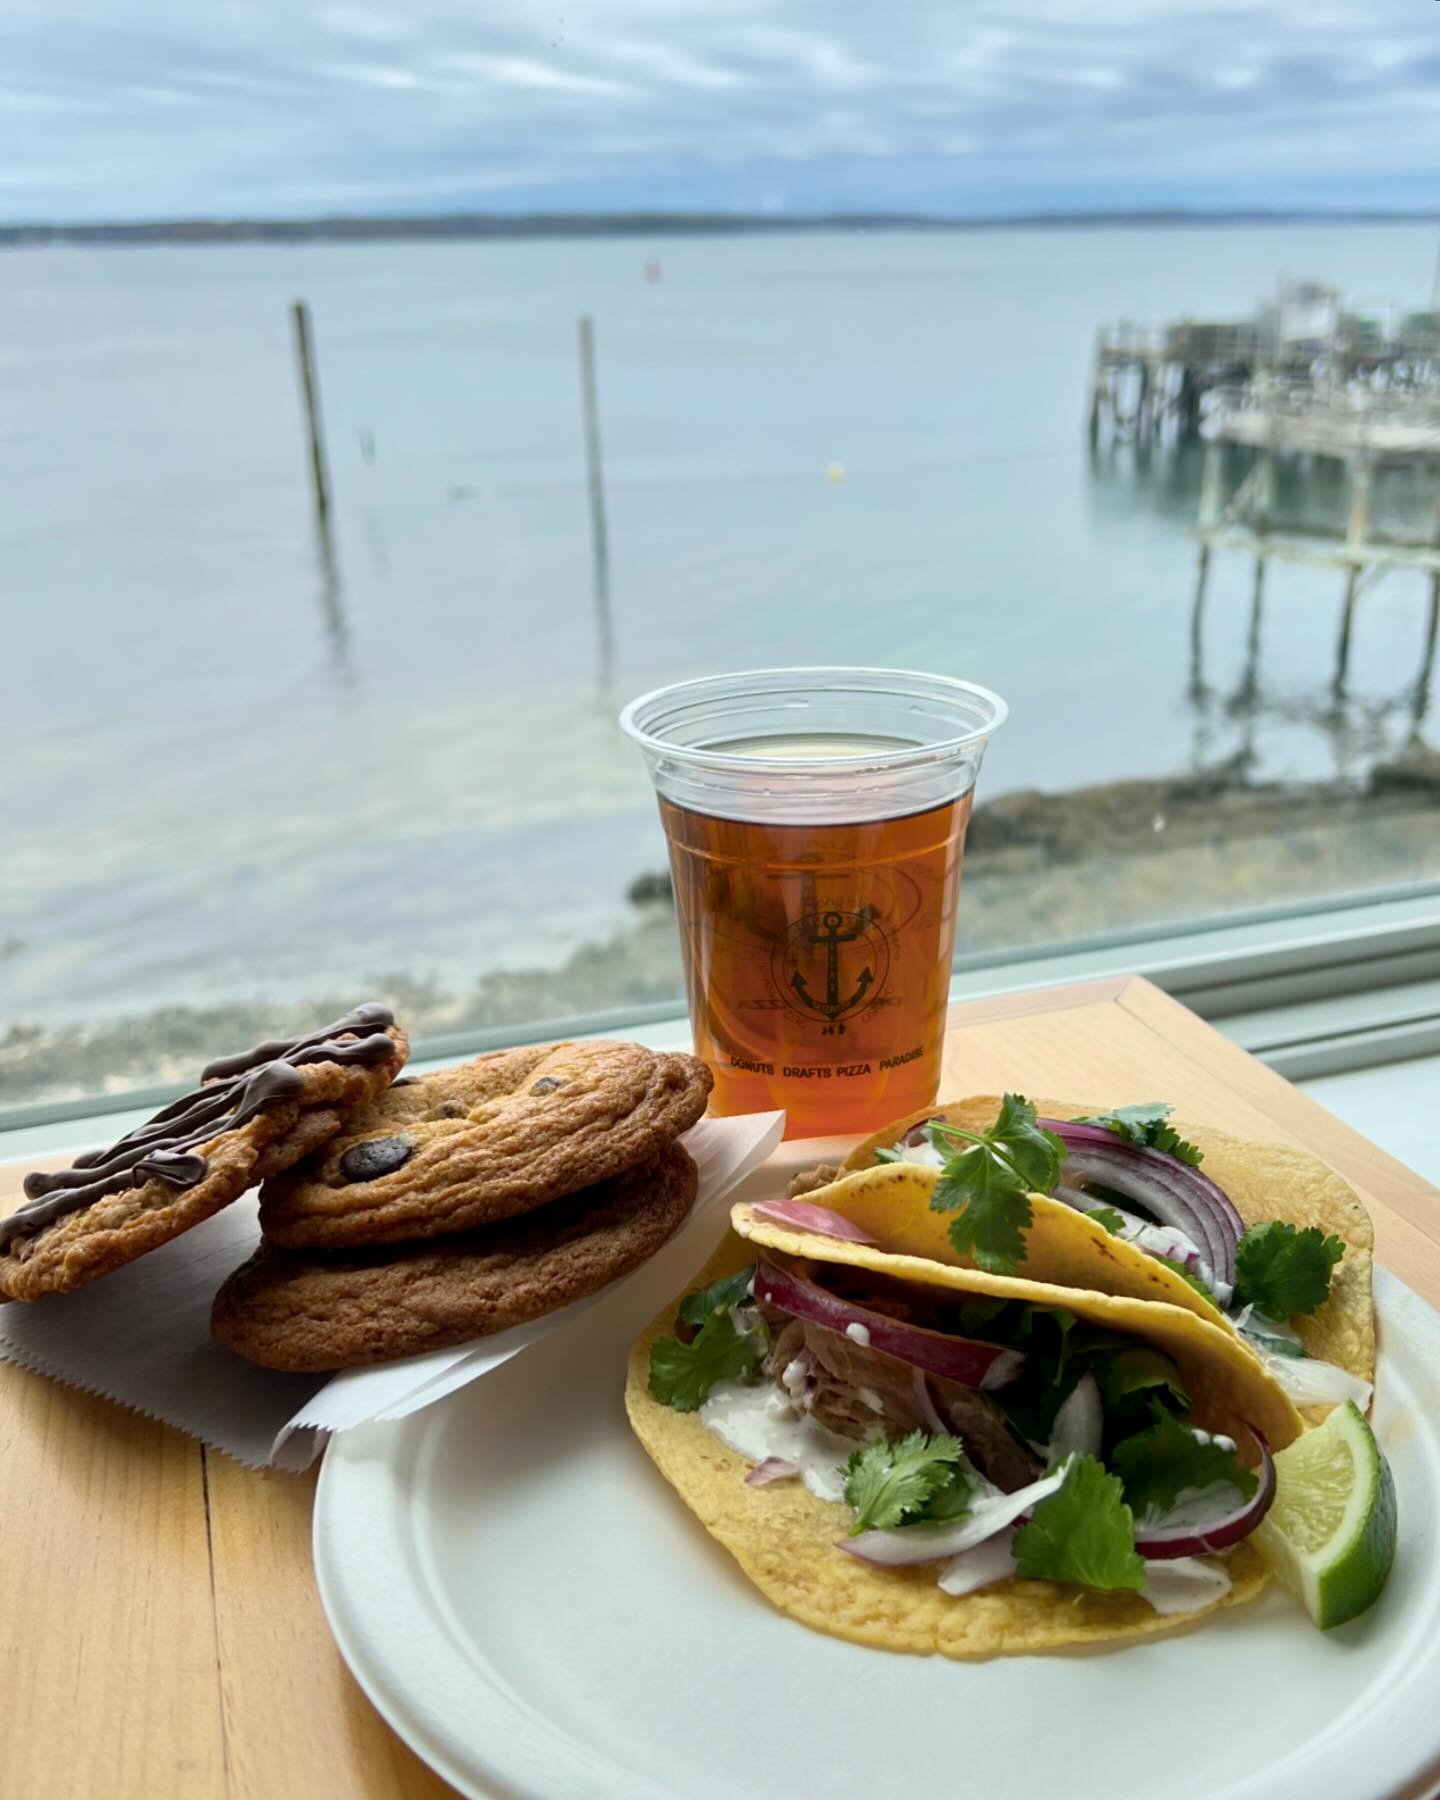 Tacos this week at the Bakehouse! With a wink to Cinco de Mayo, we&rsquo;ll have Modeloitos and pork tacos with a red onion- cilantro slaw &amp; lime crema!
#winkwink 
#tacos 
#modeloito 
#cincodemayo 
#maineislands 
#cascobay